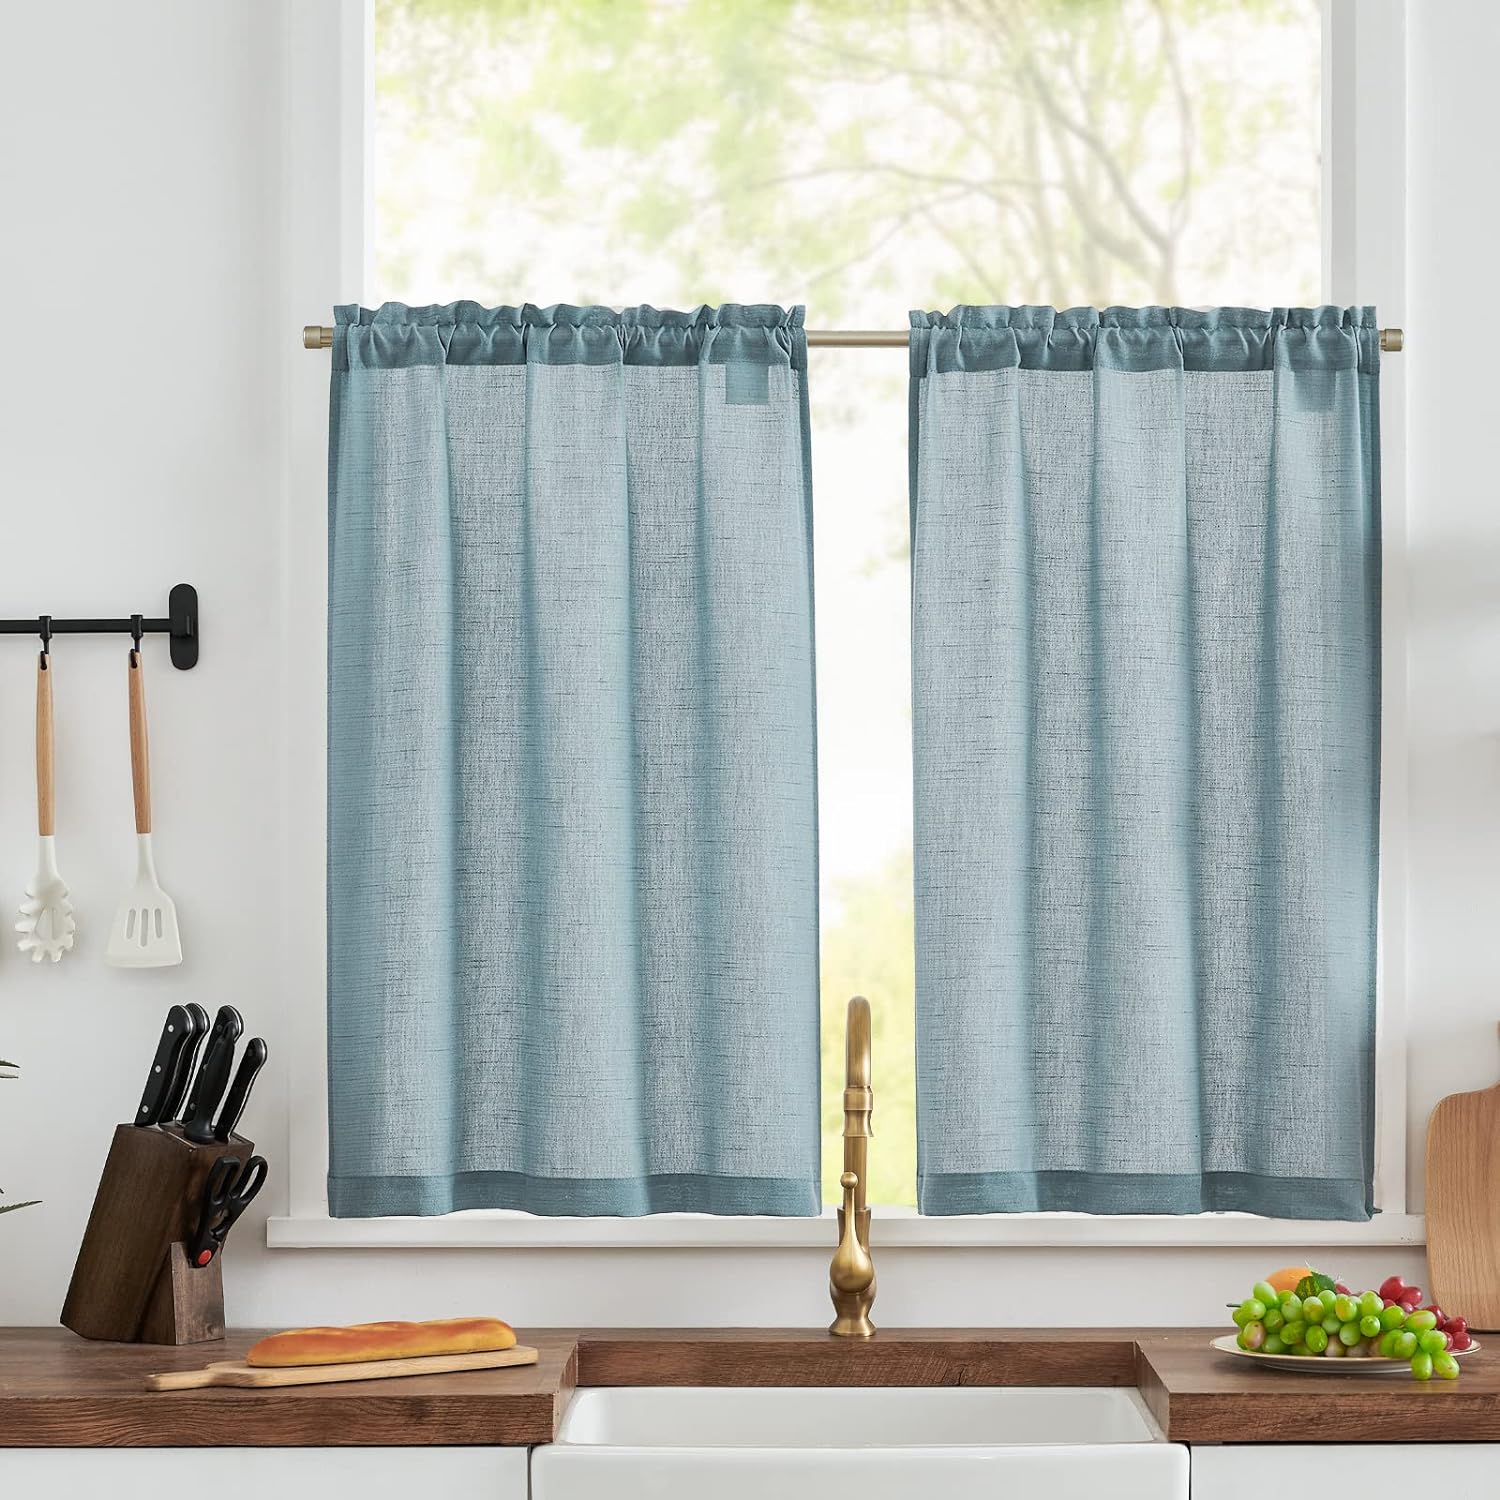 A small kitchen window with blue cafe curtains.